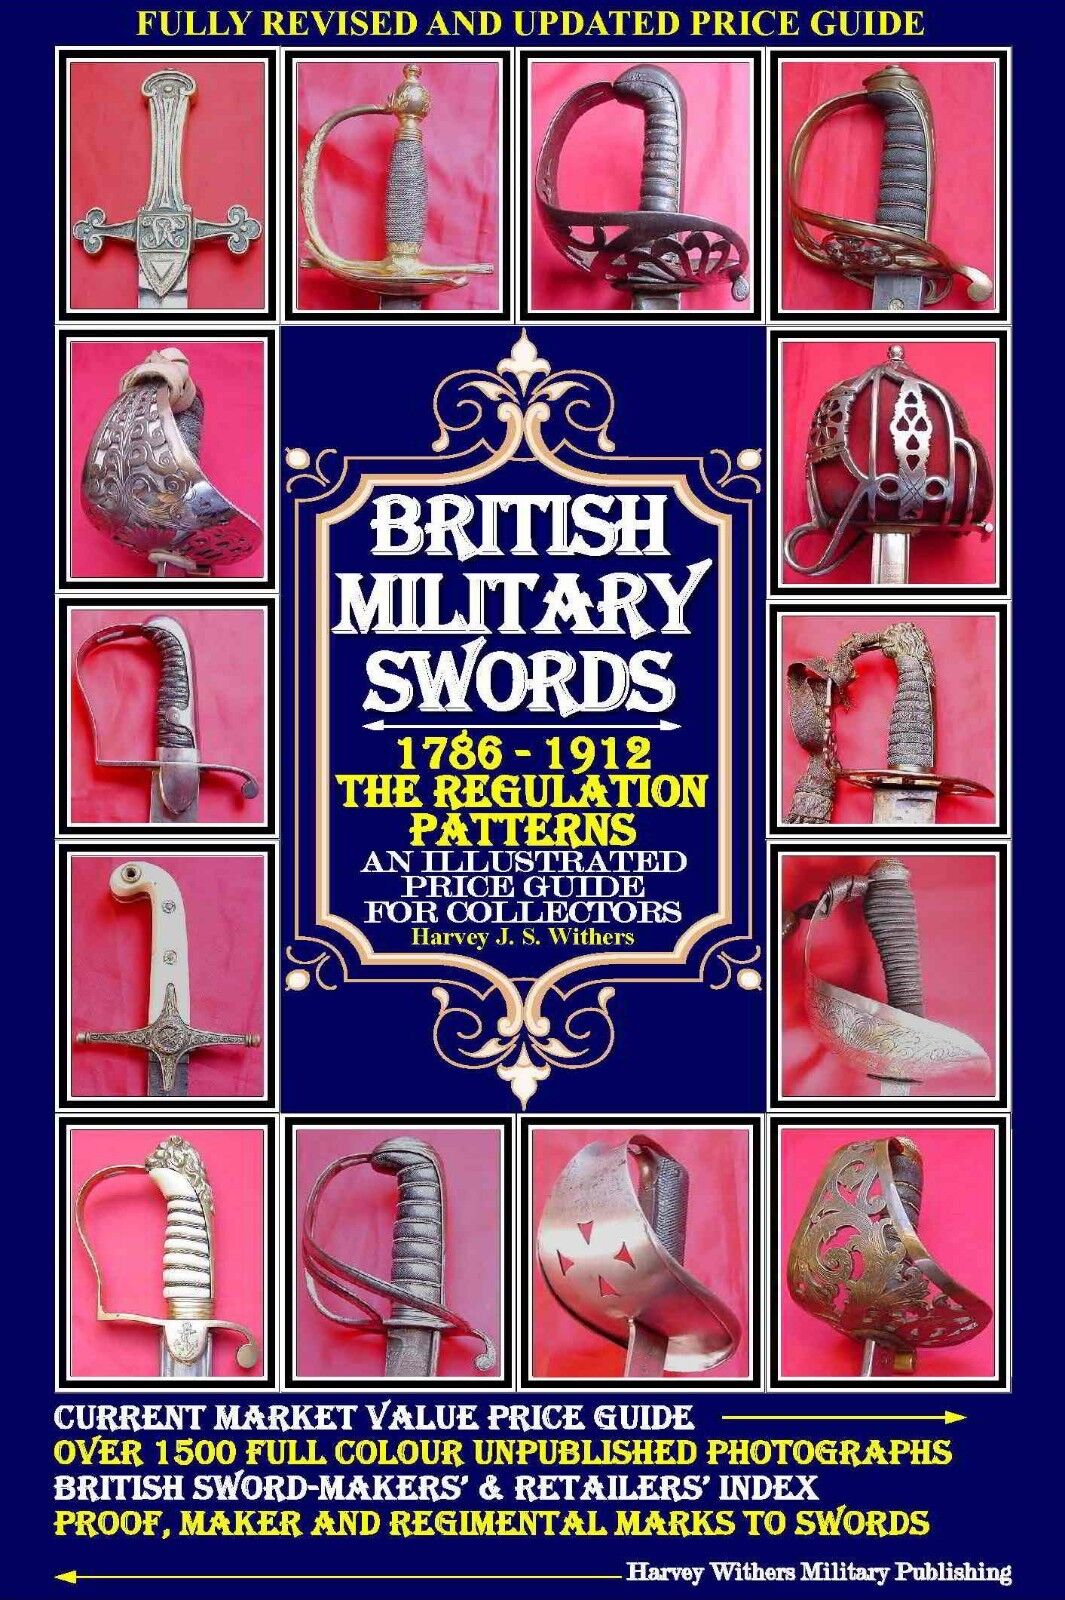 BRITISH MILITARY SWORDS 1786-1912 - THE REGULATION PATTERNS - FULL COLOUR BOOK